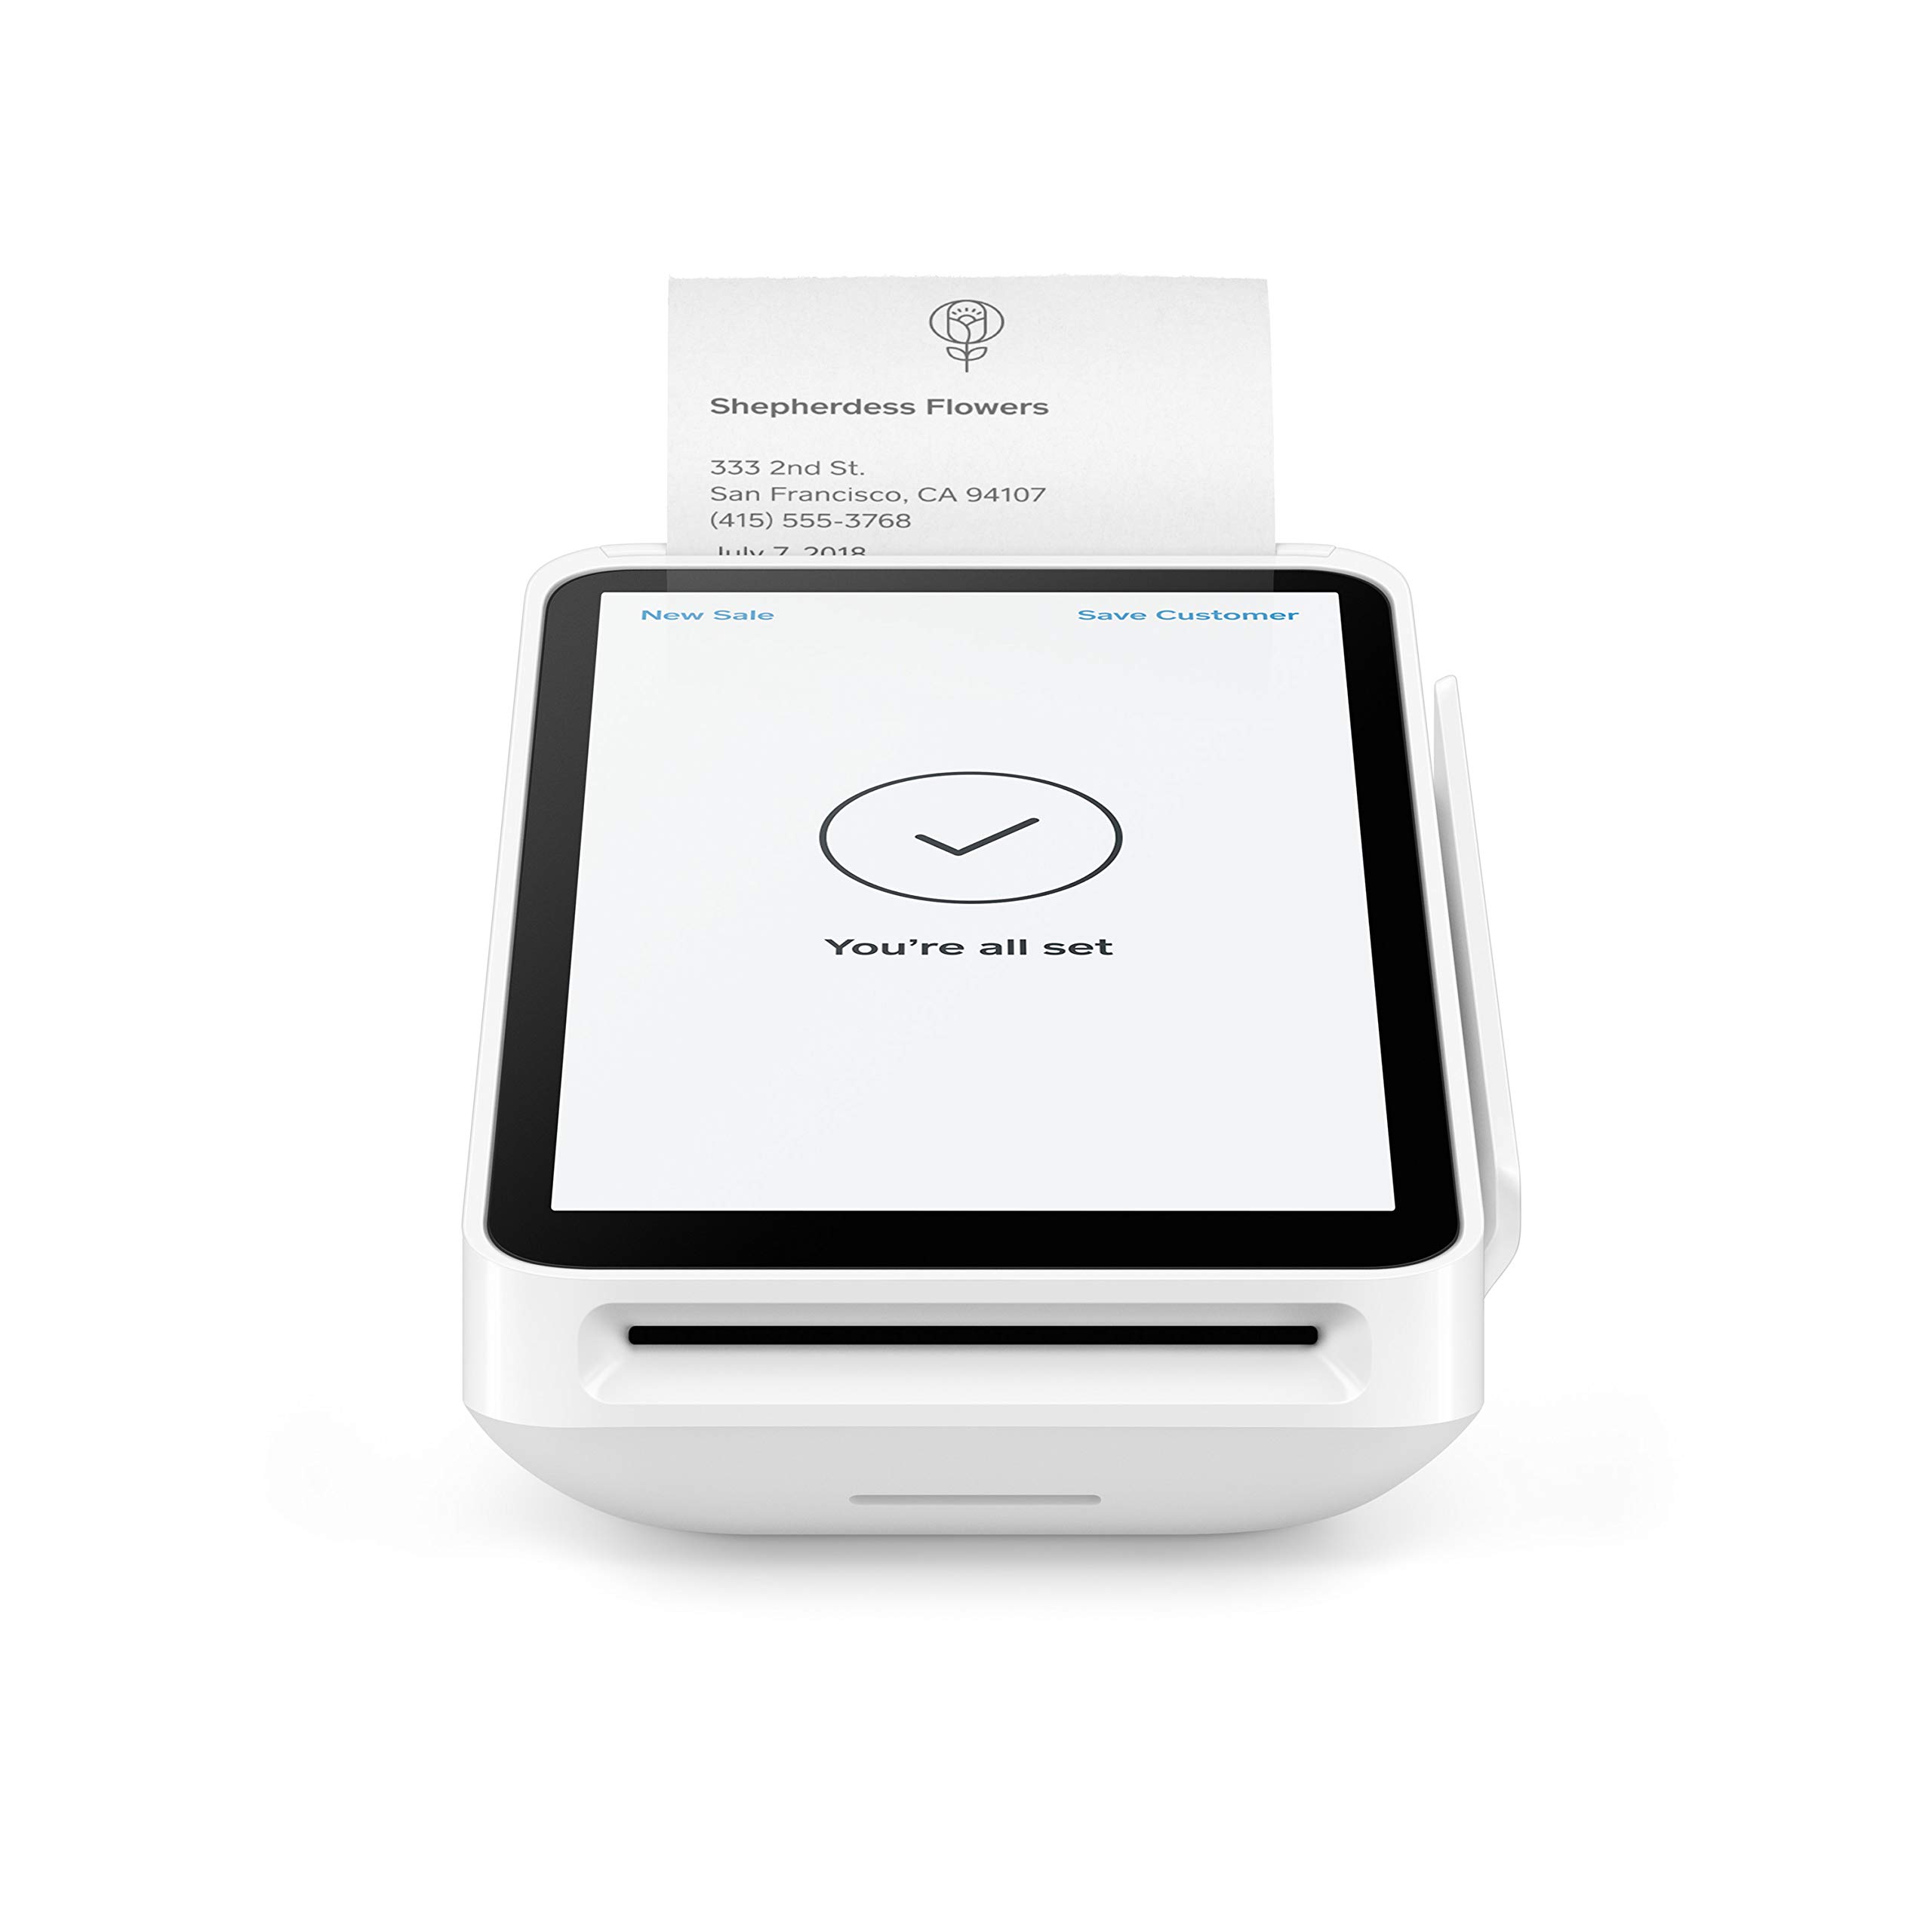 Square Terminal - Credit Card Machine to Accept All Payments | Mobile POS